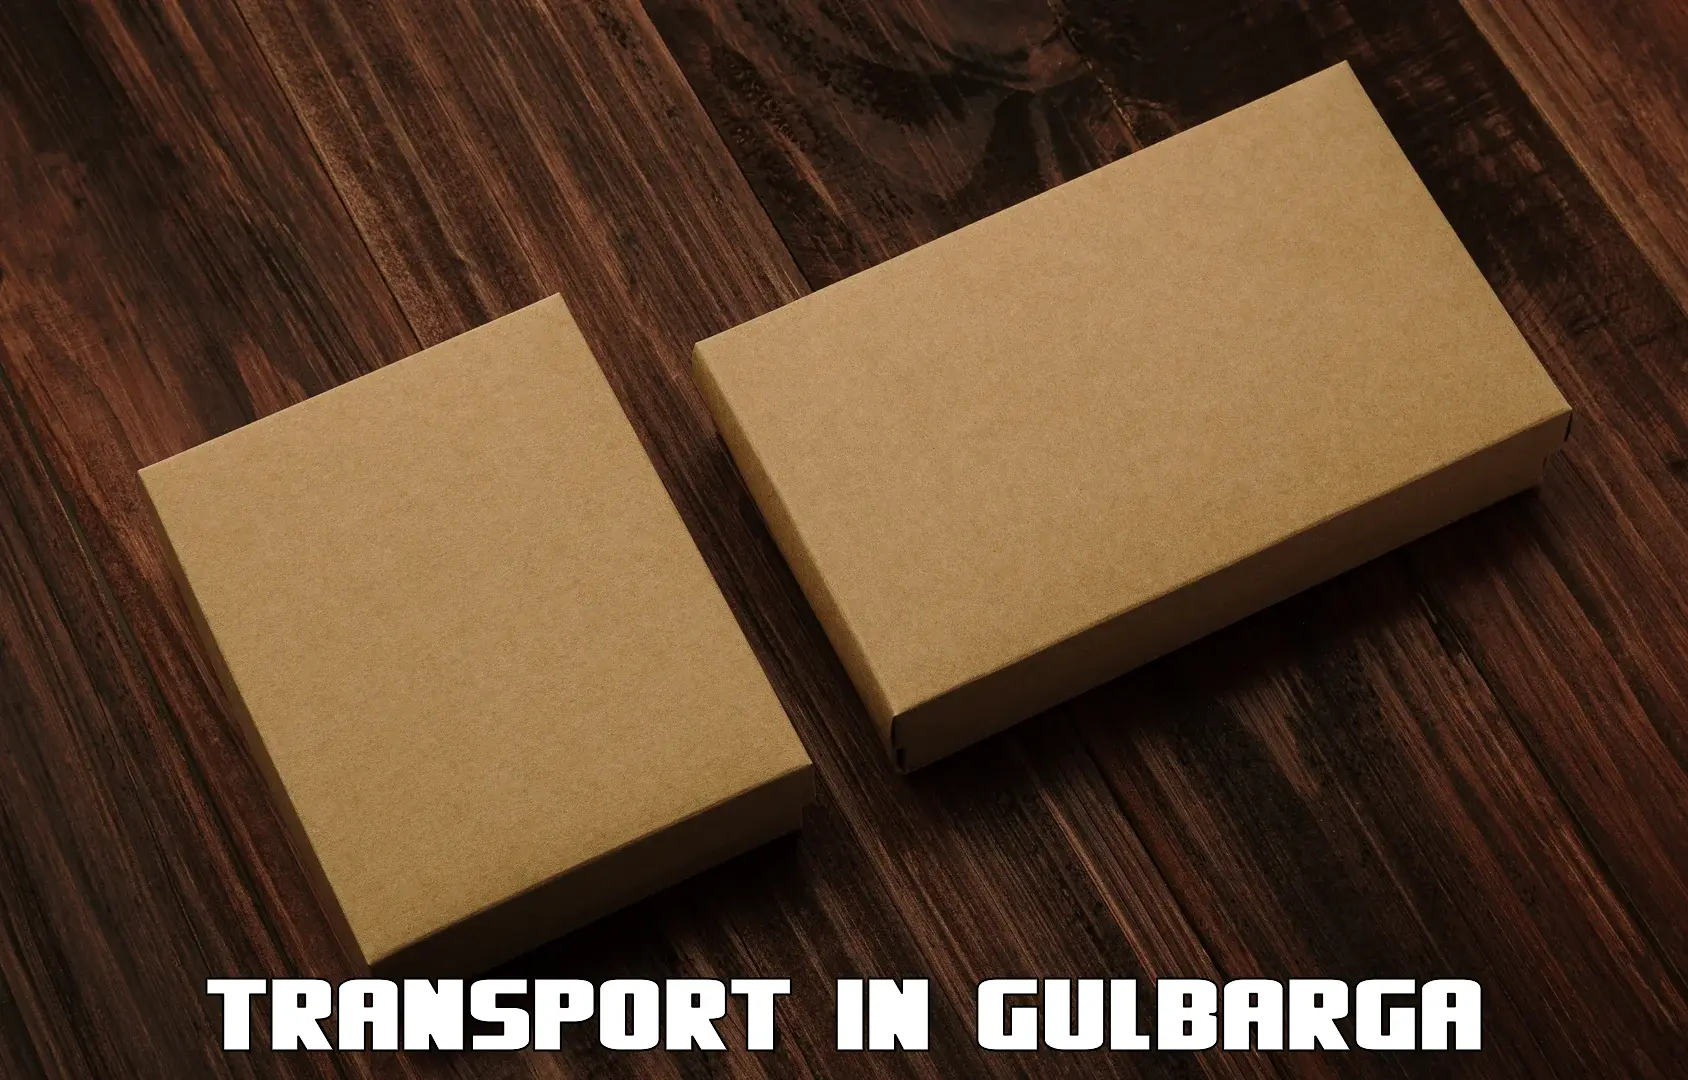 Transport bike from one state to another in Gulbarga